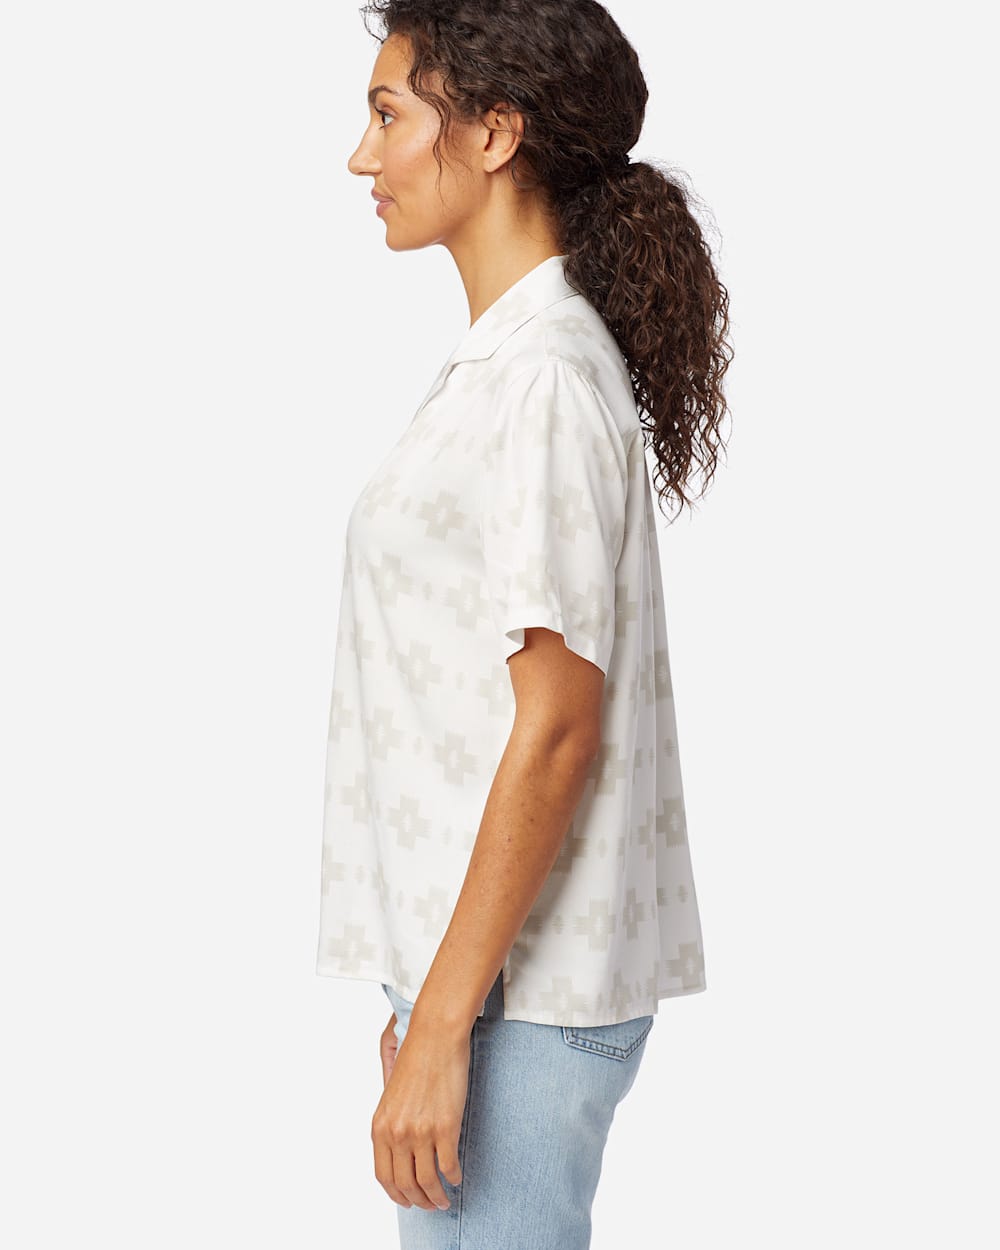 ALTERNATE VIEW OF WOMEN'S SHORT-SLEEVE PATTERNED SHIRT IN WHITE image number 2